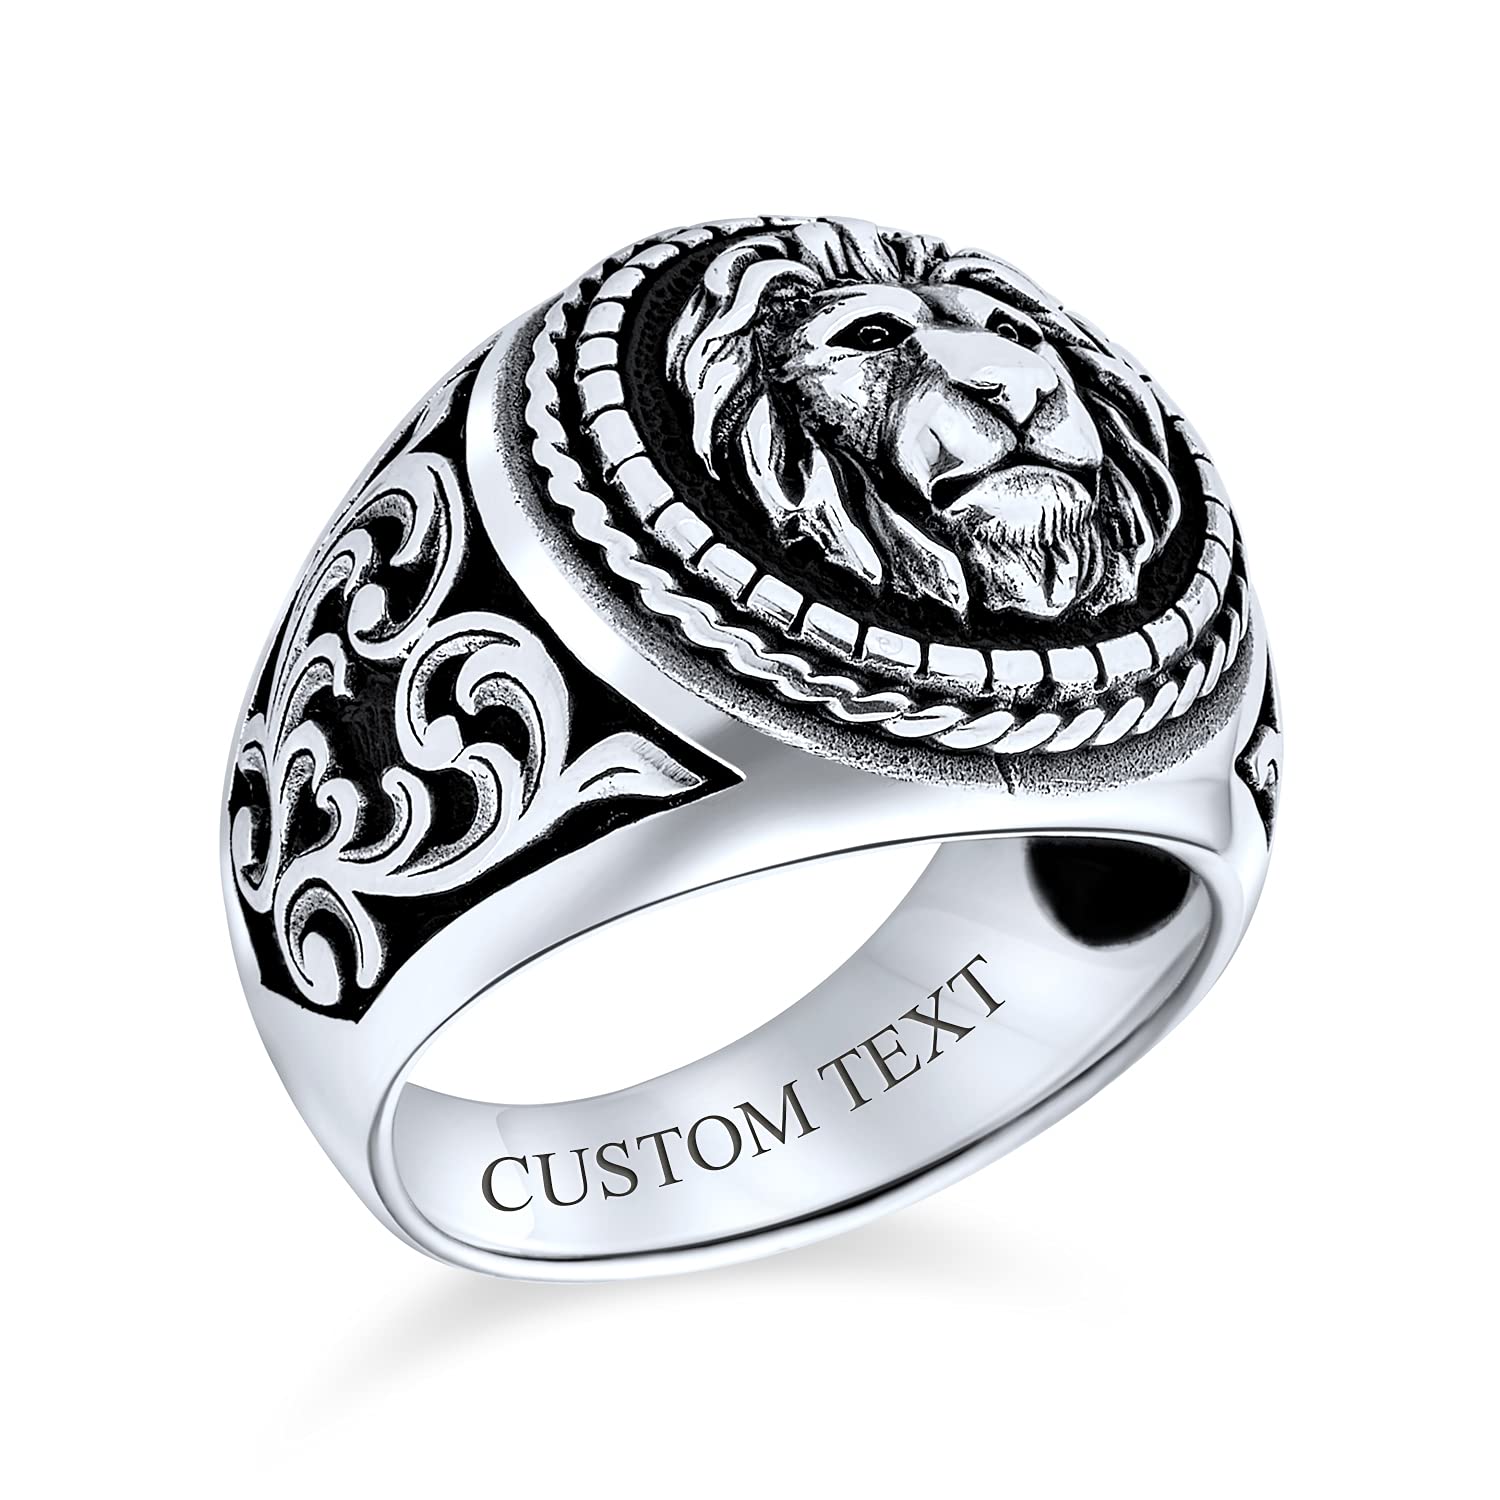 Personalize Statement Vintage Style King Of Jungle Lion Ring For Men Solid Oxidized .925 Sterling Silver Handmade In Turkey